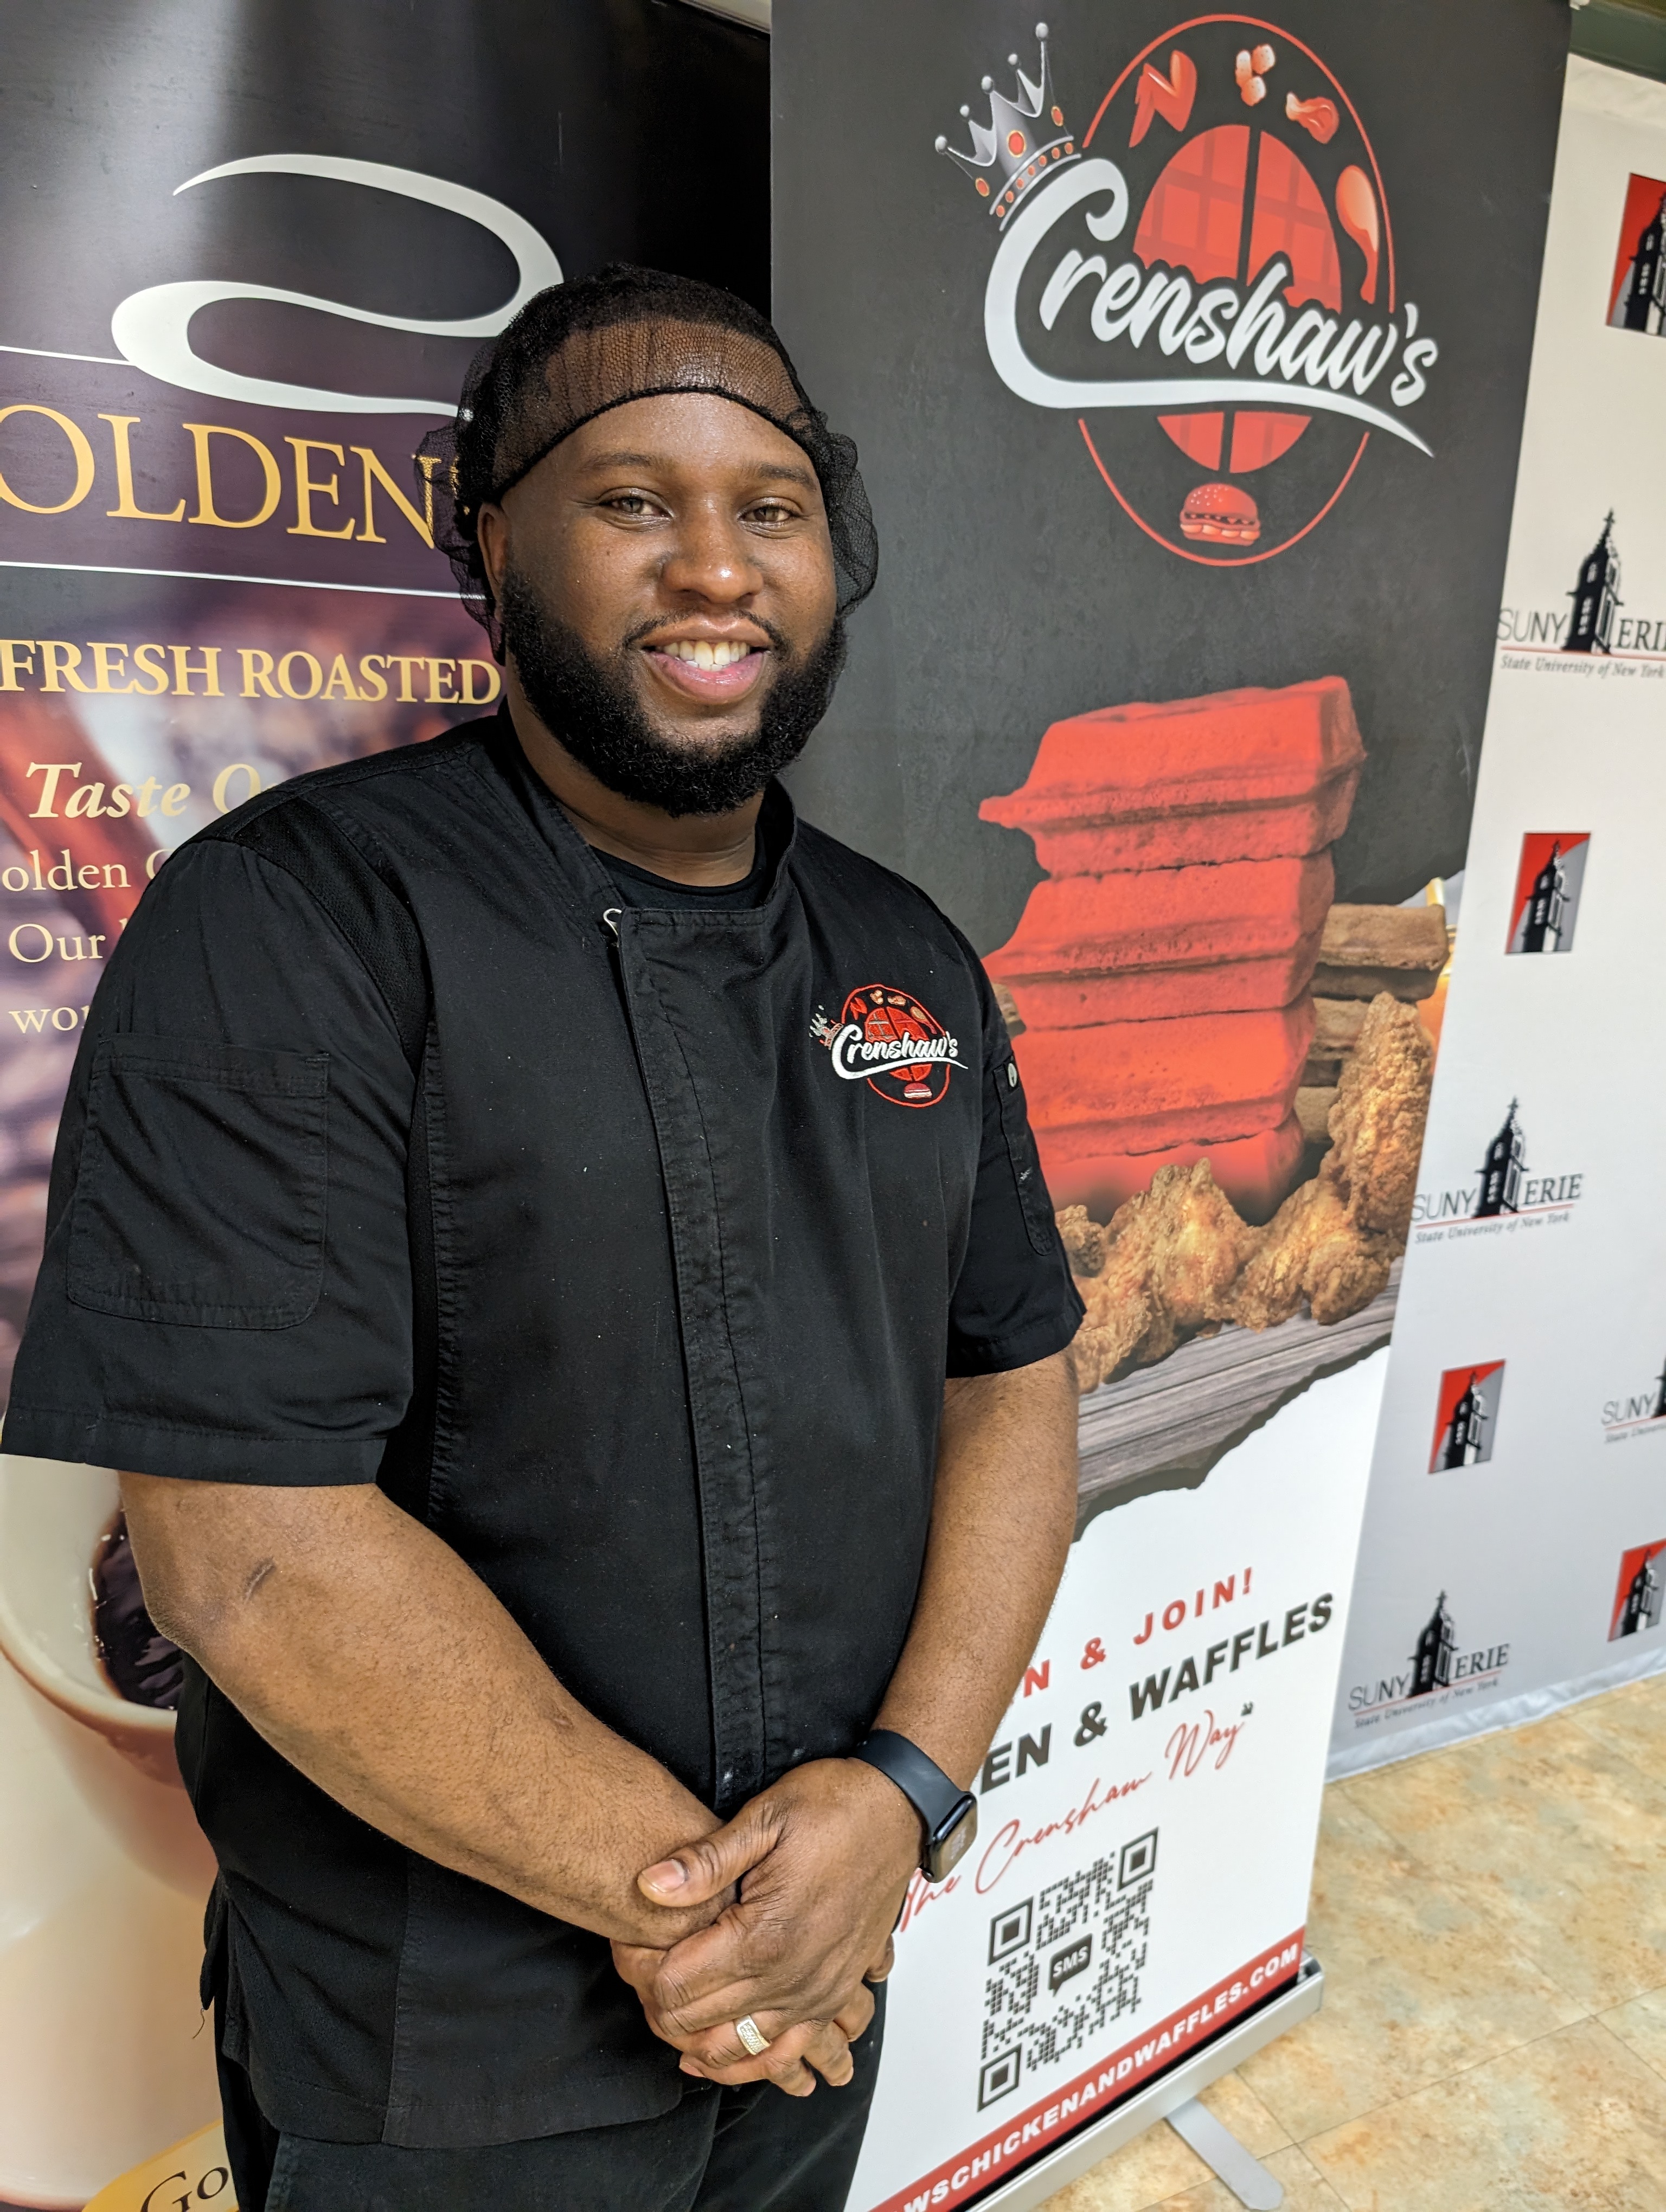 Gregory Crenshaw, Crenshaw’s Chicken and Waffles